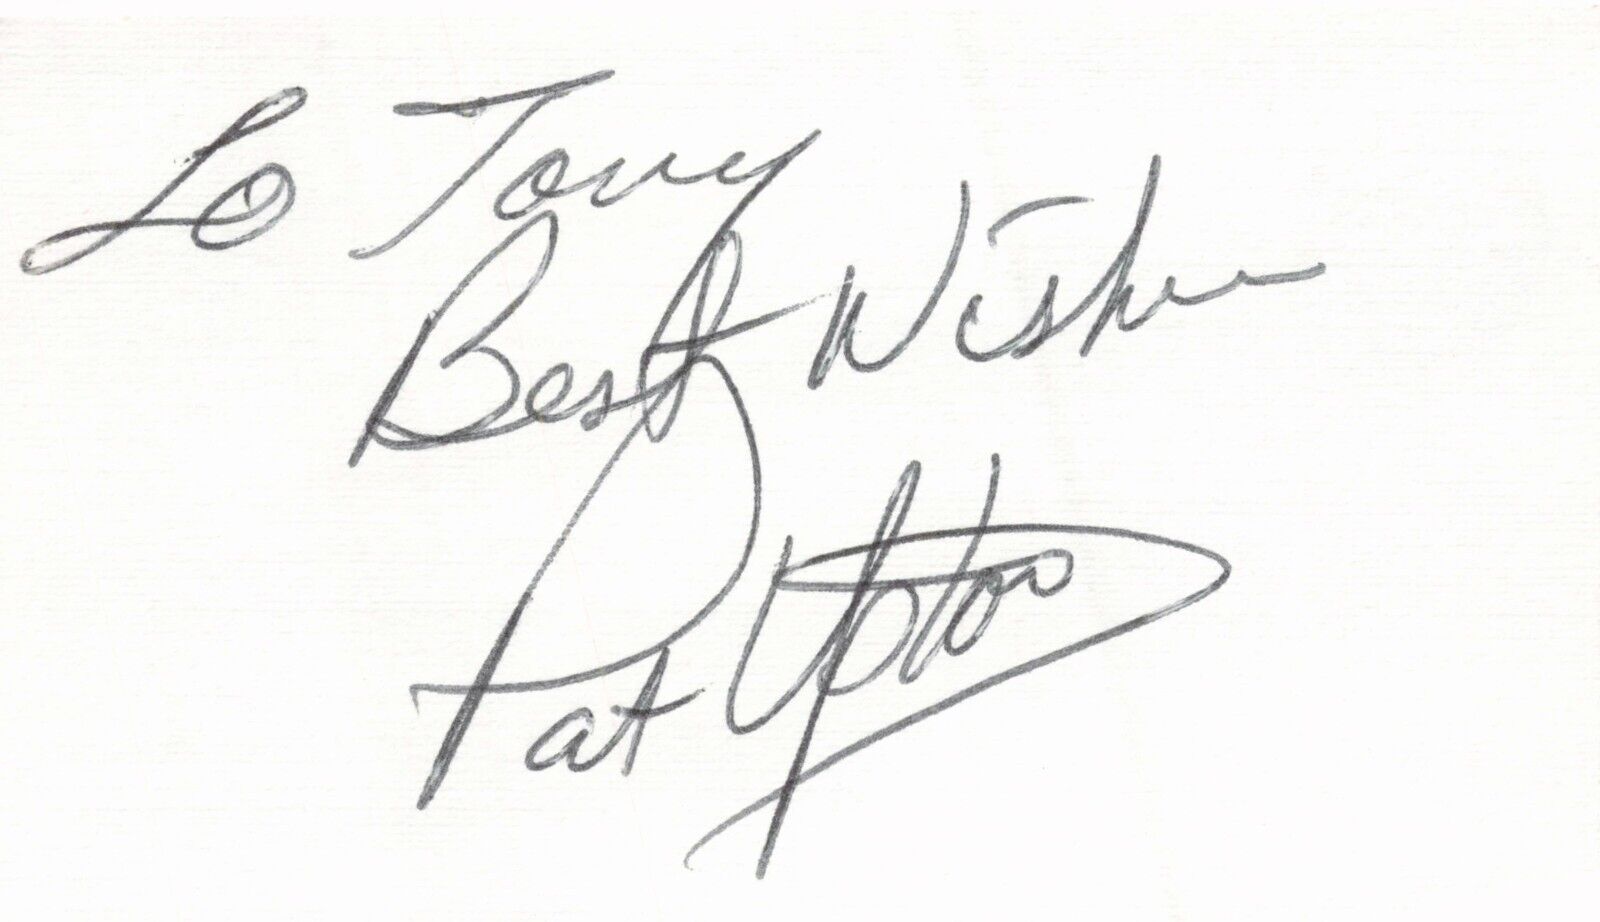 Pat Upton Signed Autographed 2x3.5 Business Card